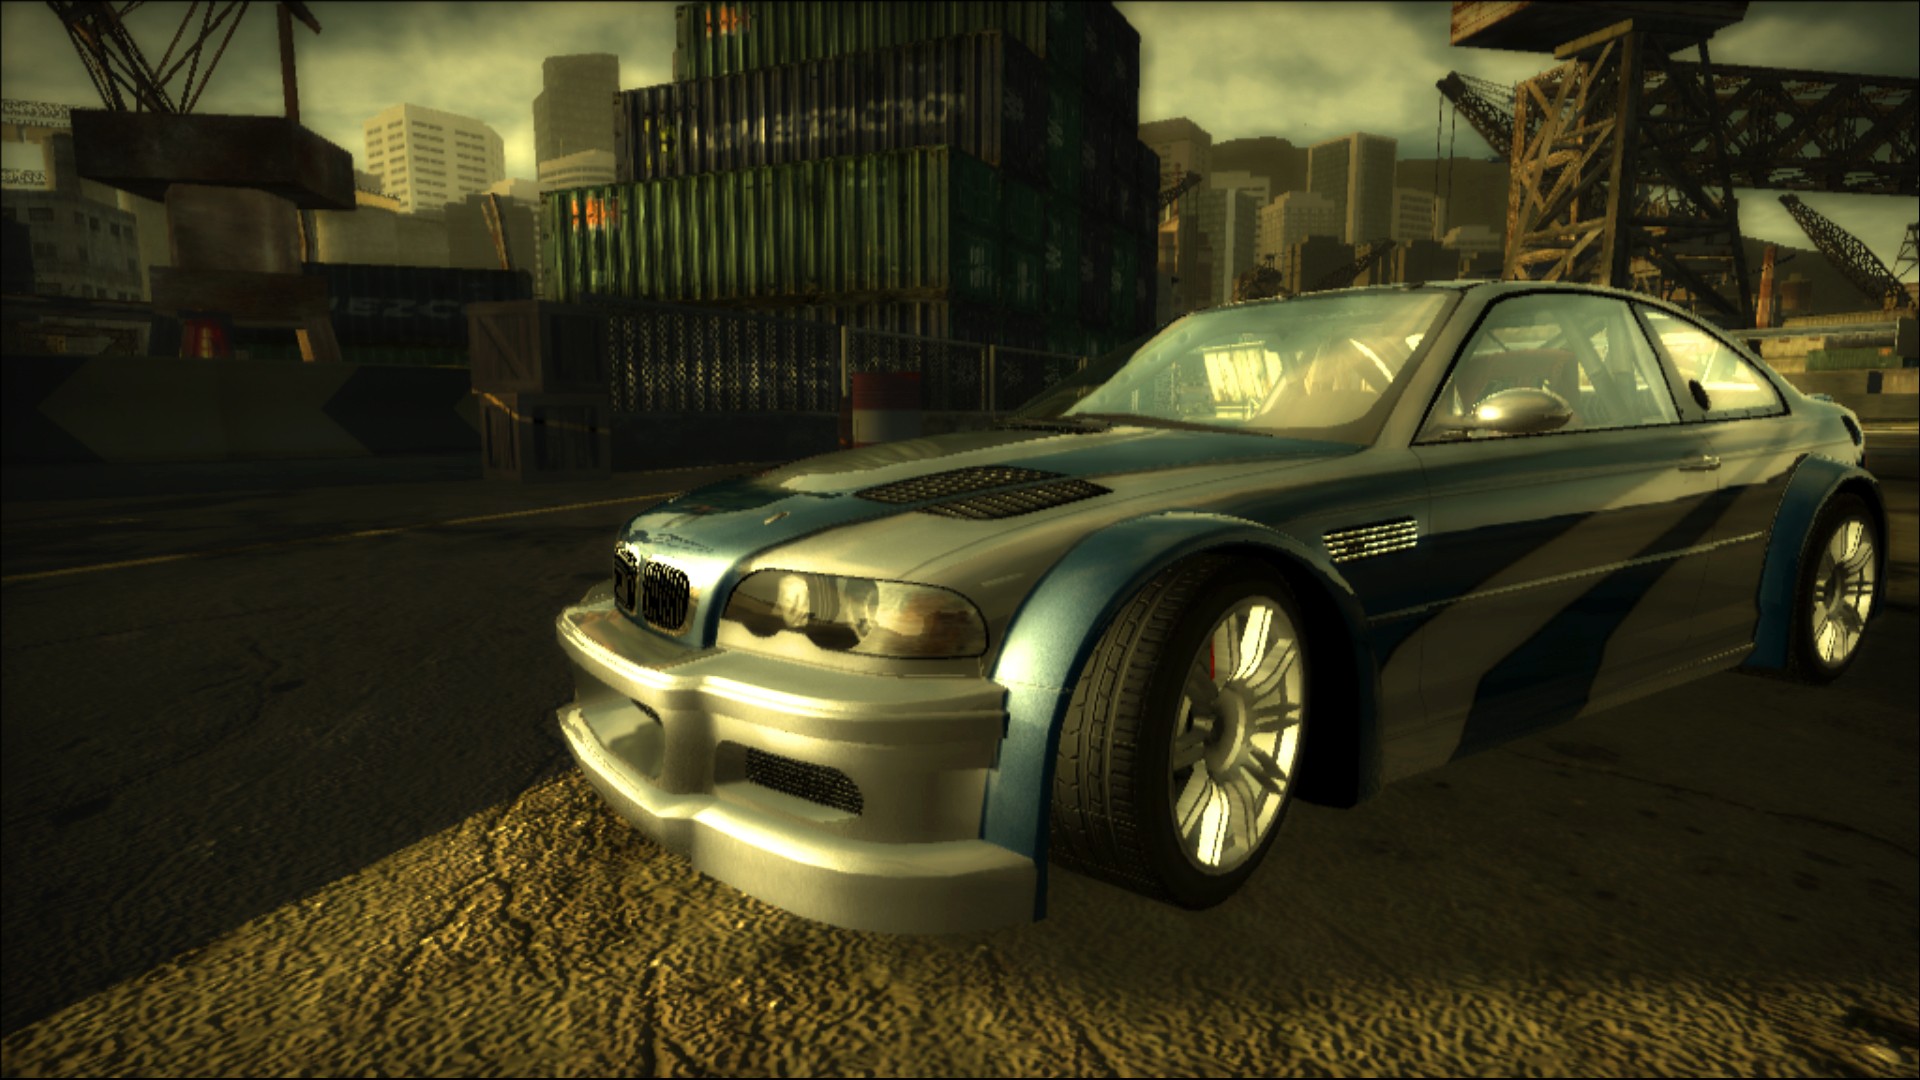 Песни из игры недфорспид. Игра NFS most wanted 2005. BMW m3 GTR. NFS most wanted 2005 мост. Need for Speed mostwanted 2005.